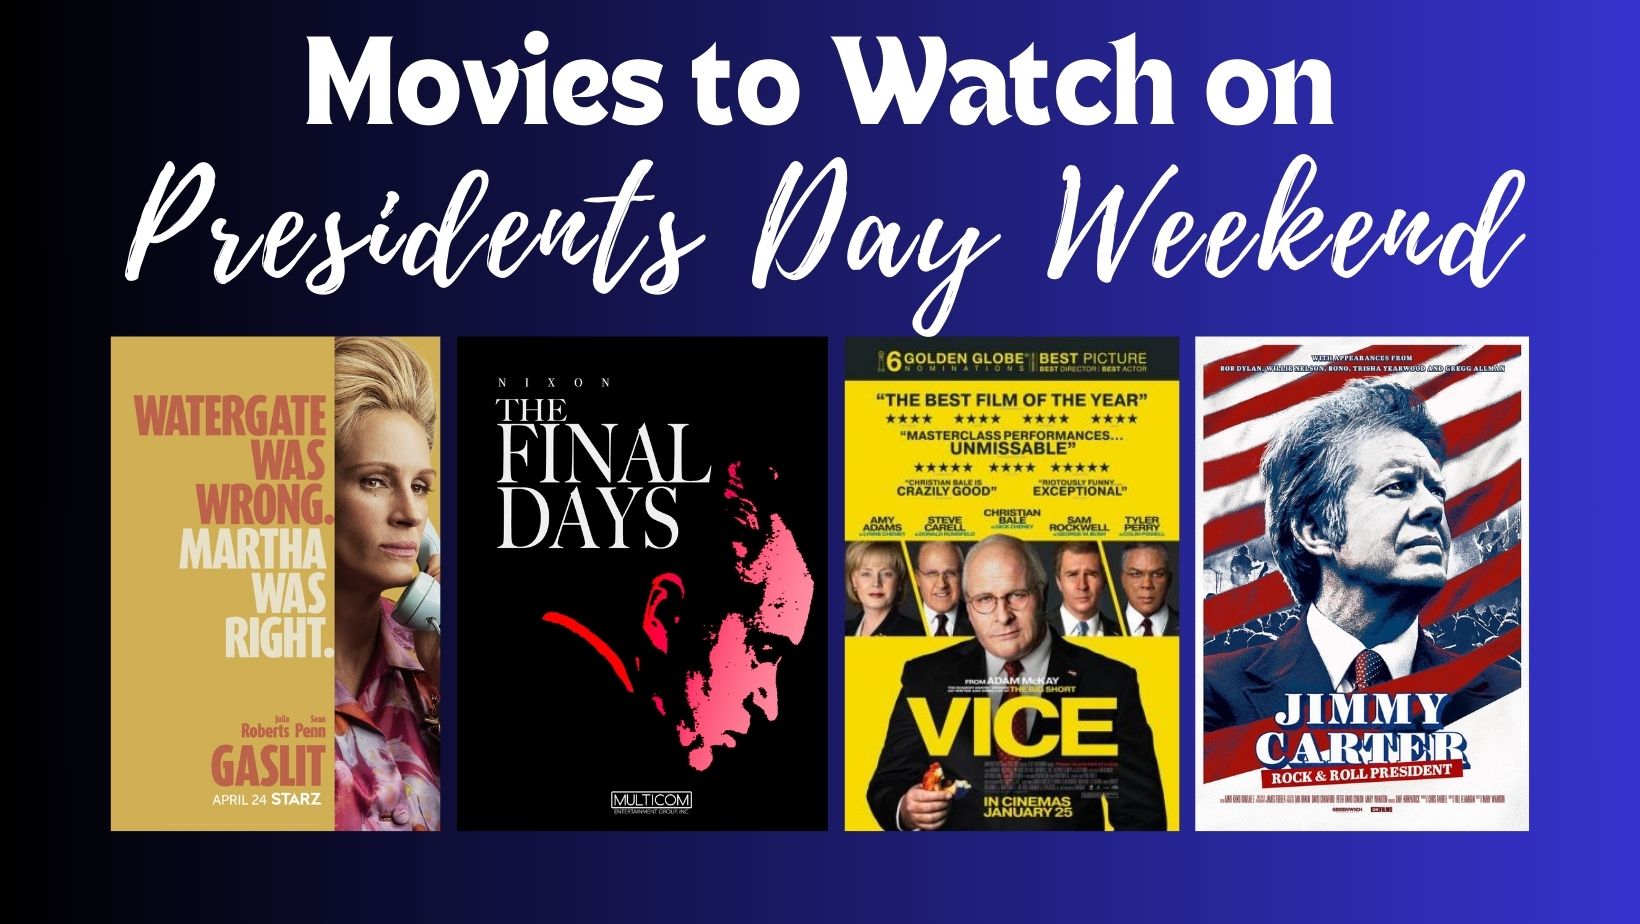 text "movies to watch presidents day weekend" with images of 4 movies about presidents